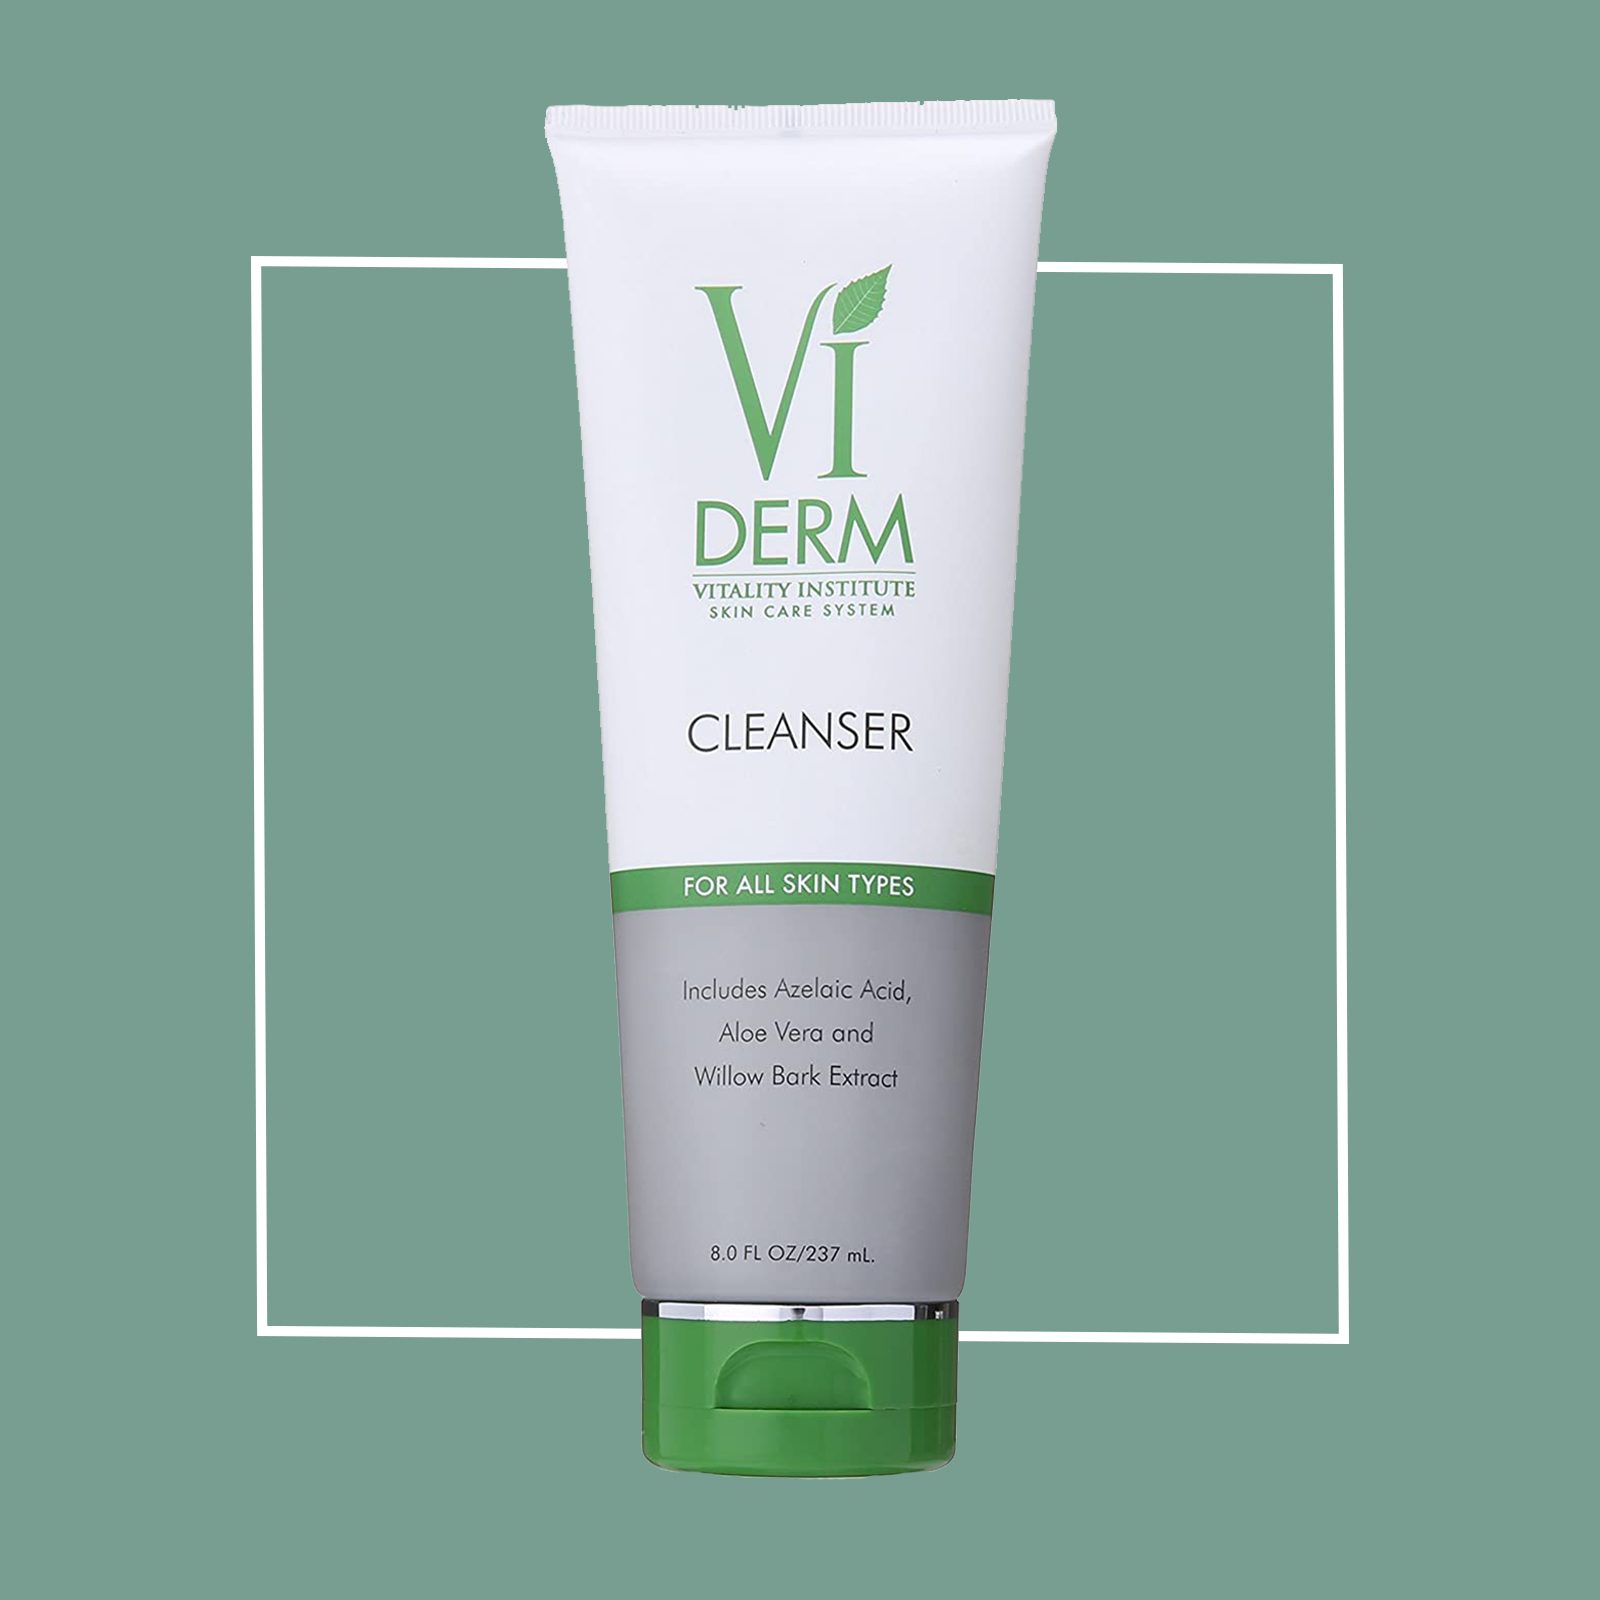 Vi Derm acne face wash for people in their 40s